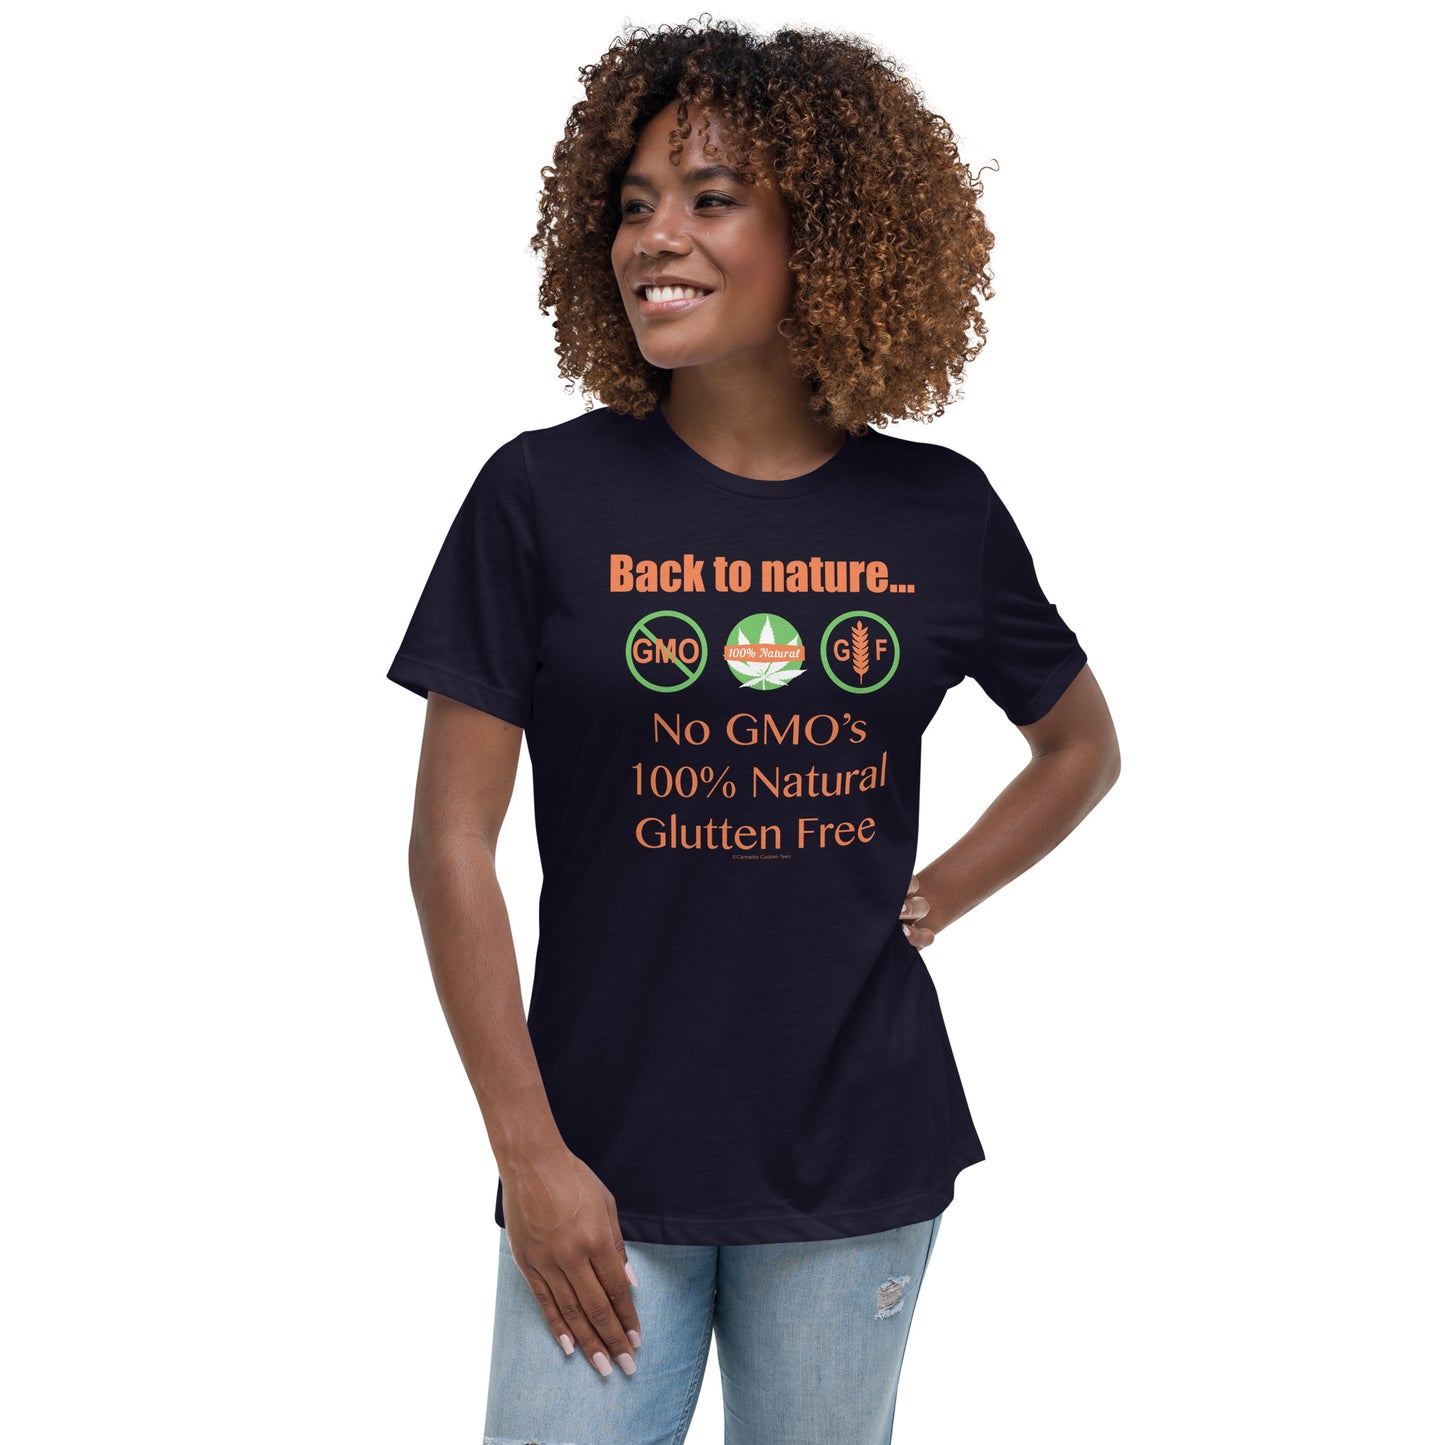 Back to Nature P401 Women's Relaxed T-Shirt